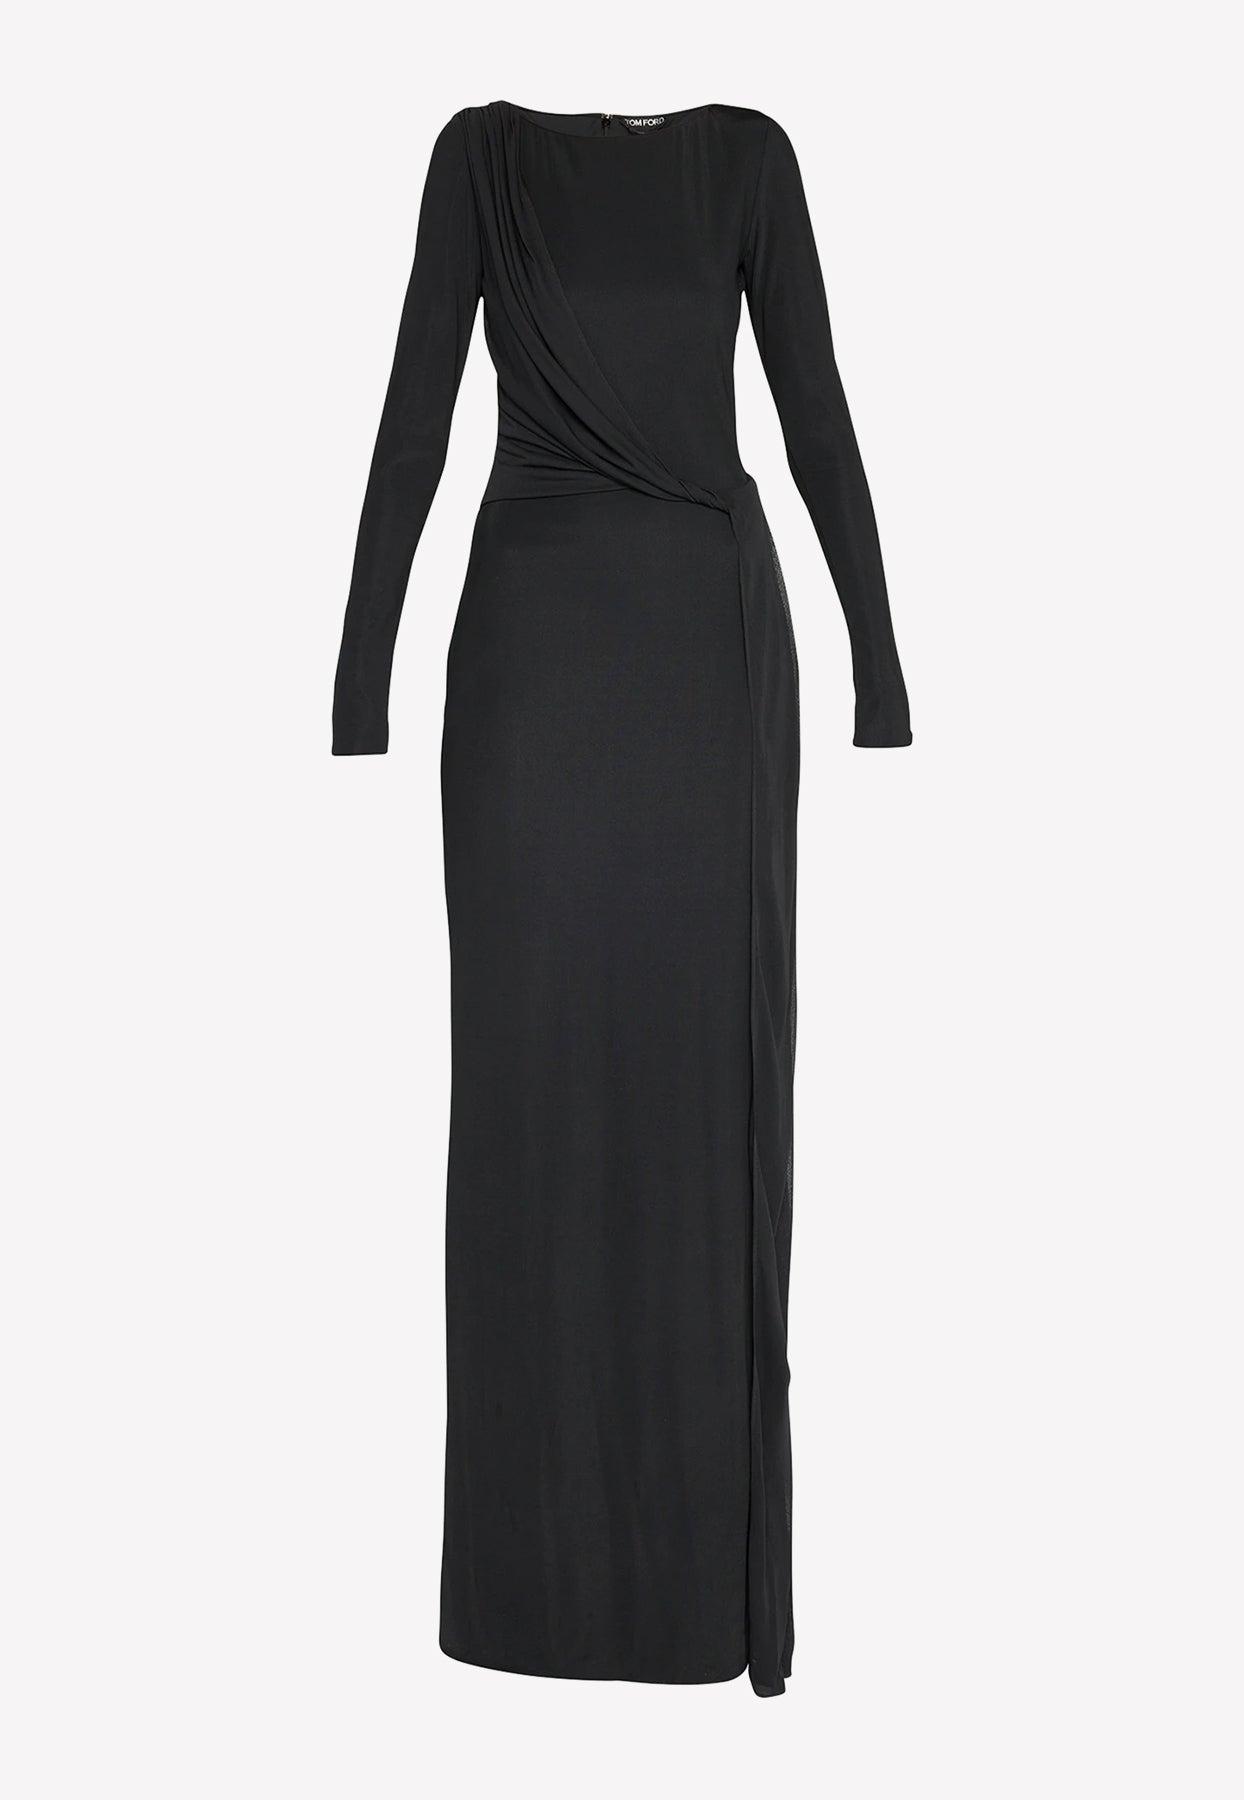 Tom Ford Twisted Drape Column Gown in Black | Lyst UK